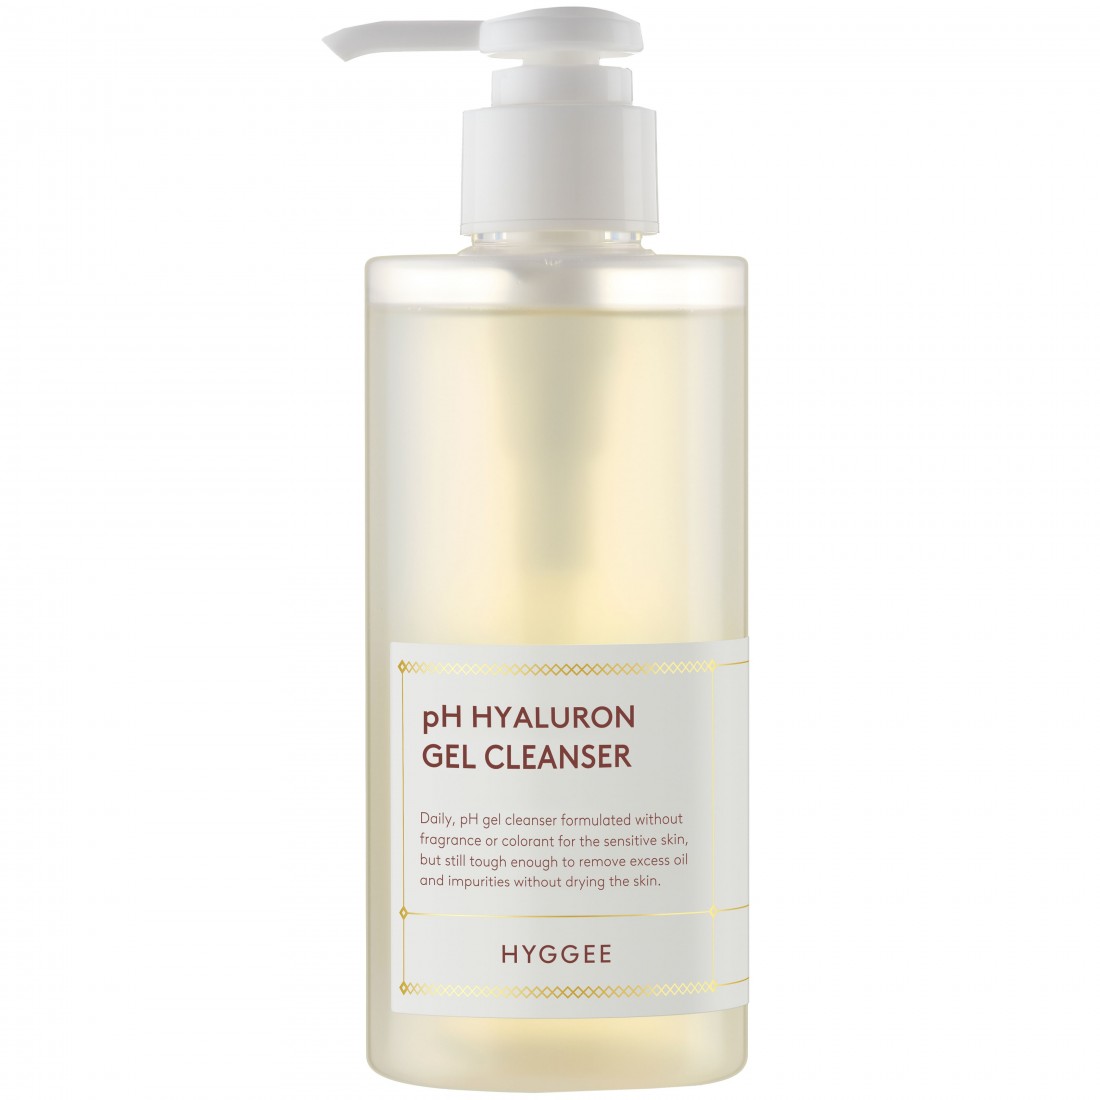 https://miin-cosmetics.co.uk/img_products/5329-zoom_producto/ph-hyaluron-gel-cleanser.jpg